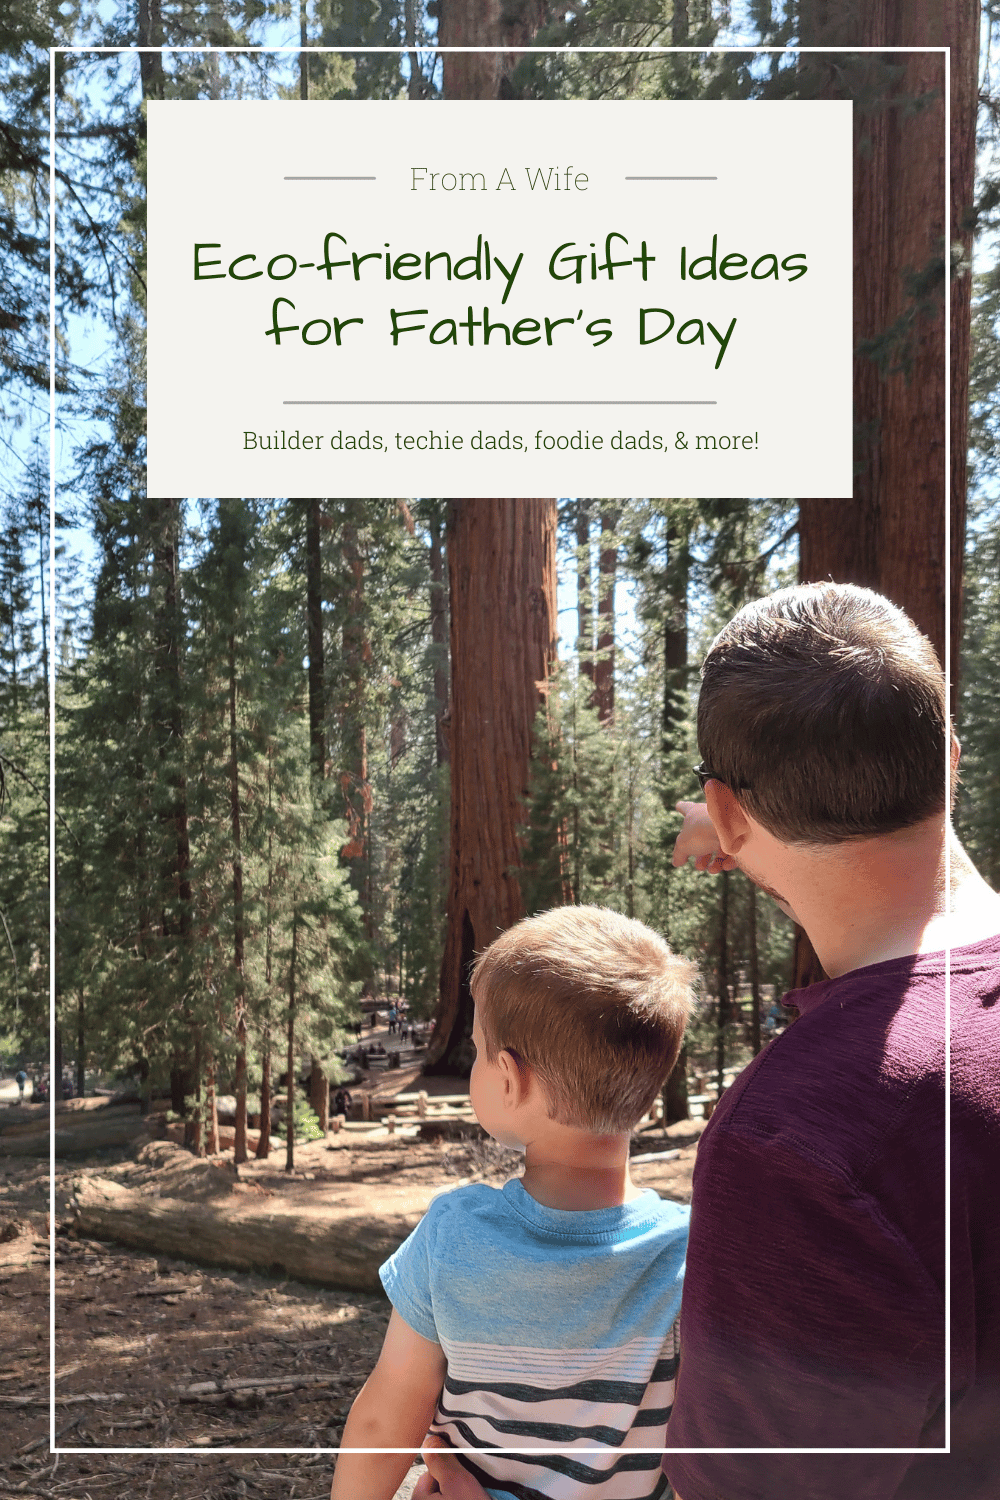 Eco-friendly Gift Ideas for Father’s Day From A Wife